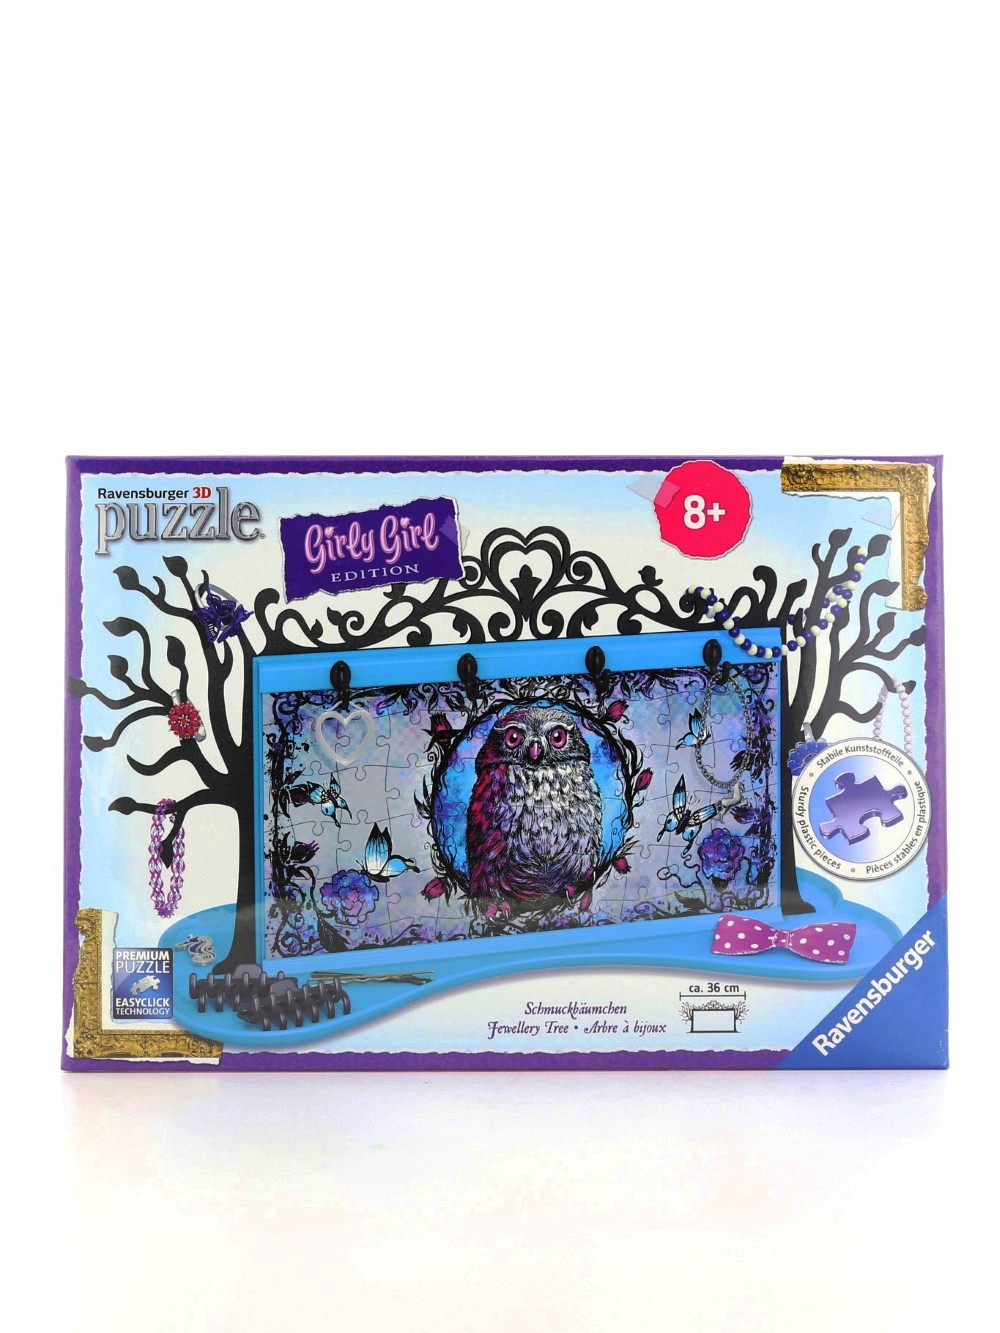 Ravensburger 3D Girly Girl Jewellery Tree Animal Trend 108 Puzzle